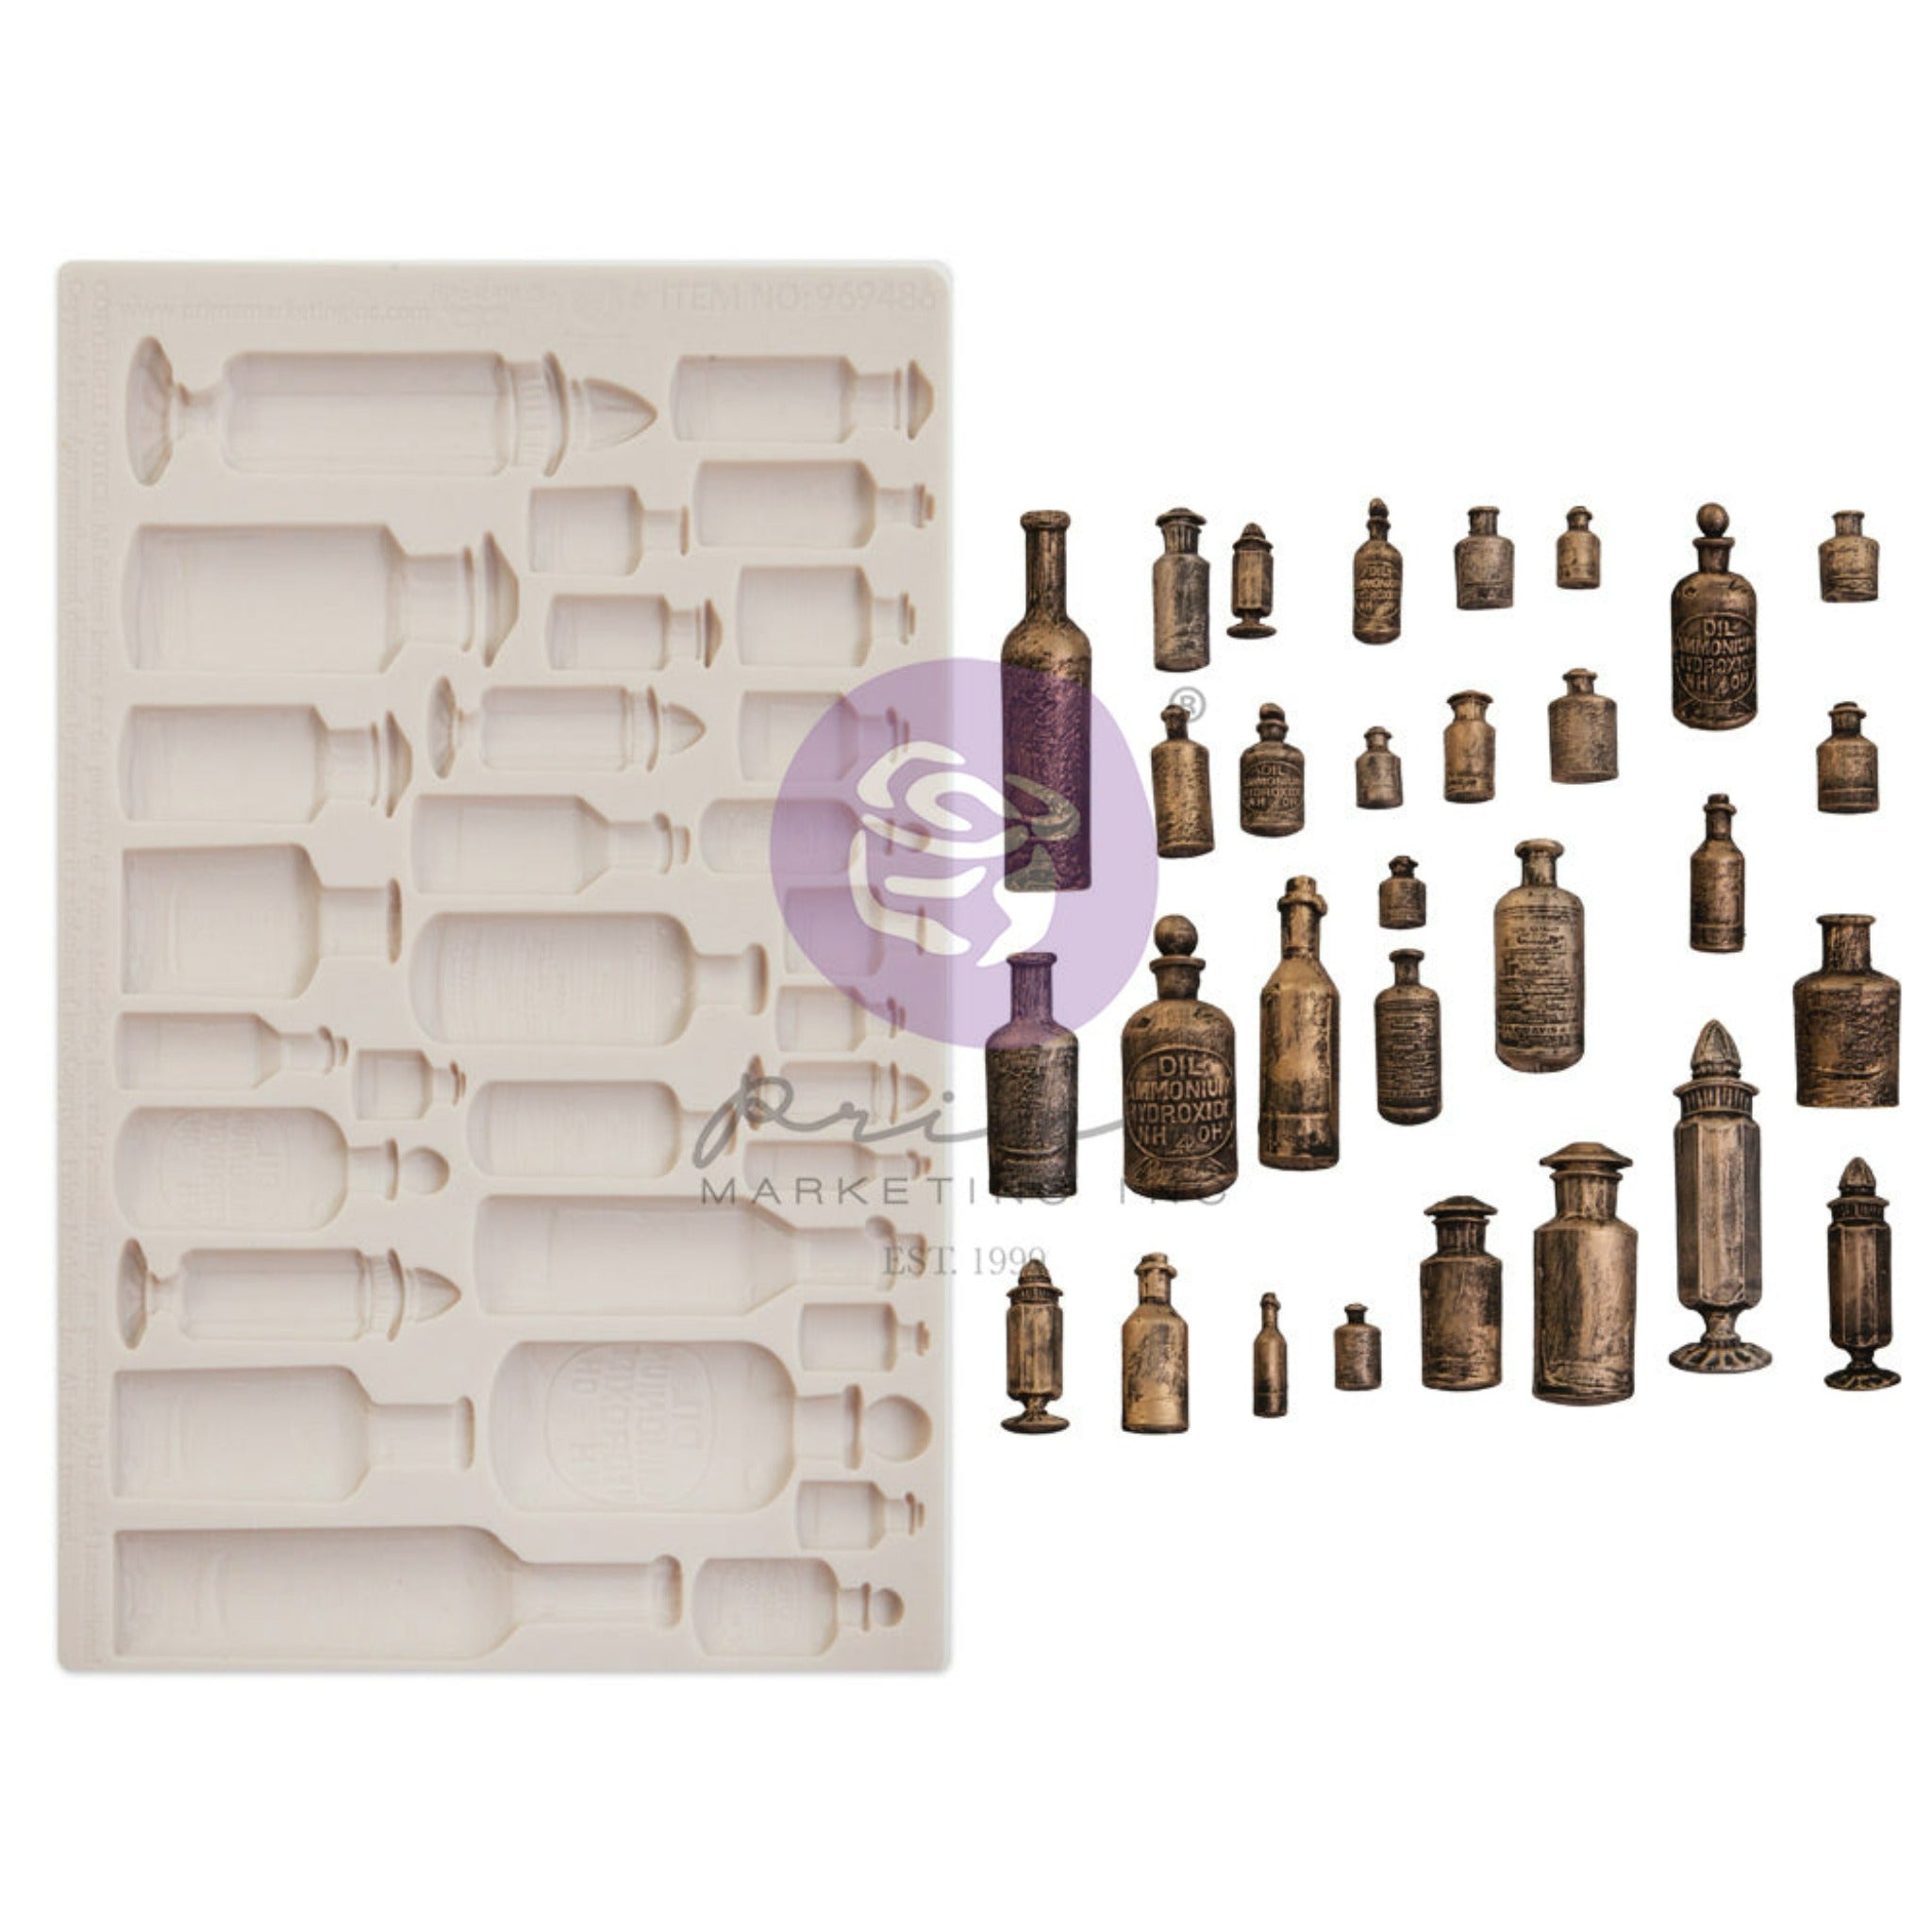 A beige silicone mold and bronze-colored castings of 30 varying sizes of apothecary bottles are against a white background.